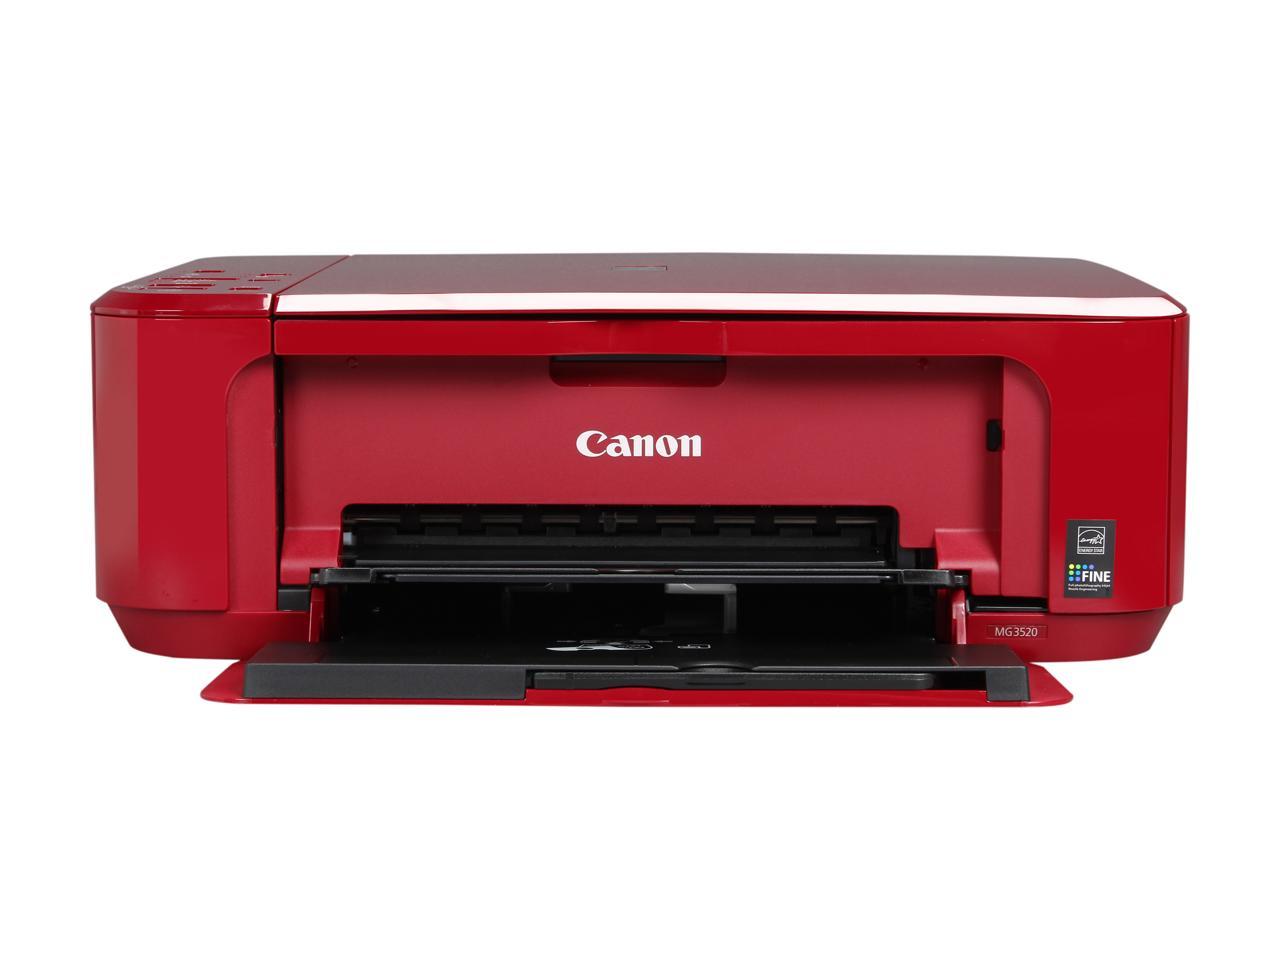 Canon Mg3520 Red Wireless Color Inkjet Printer 5985